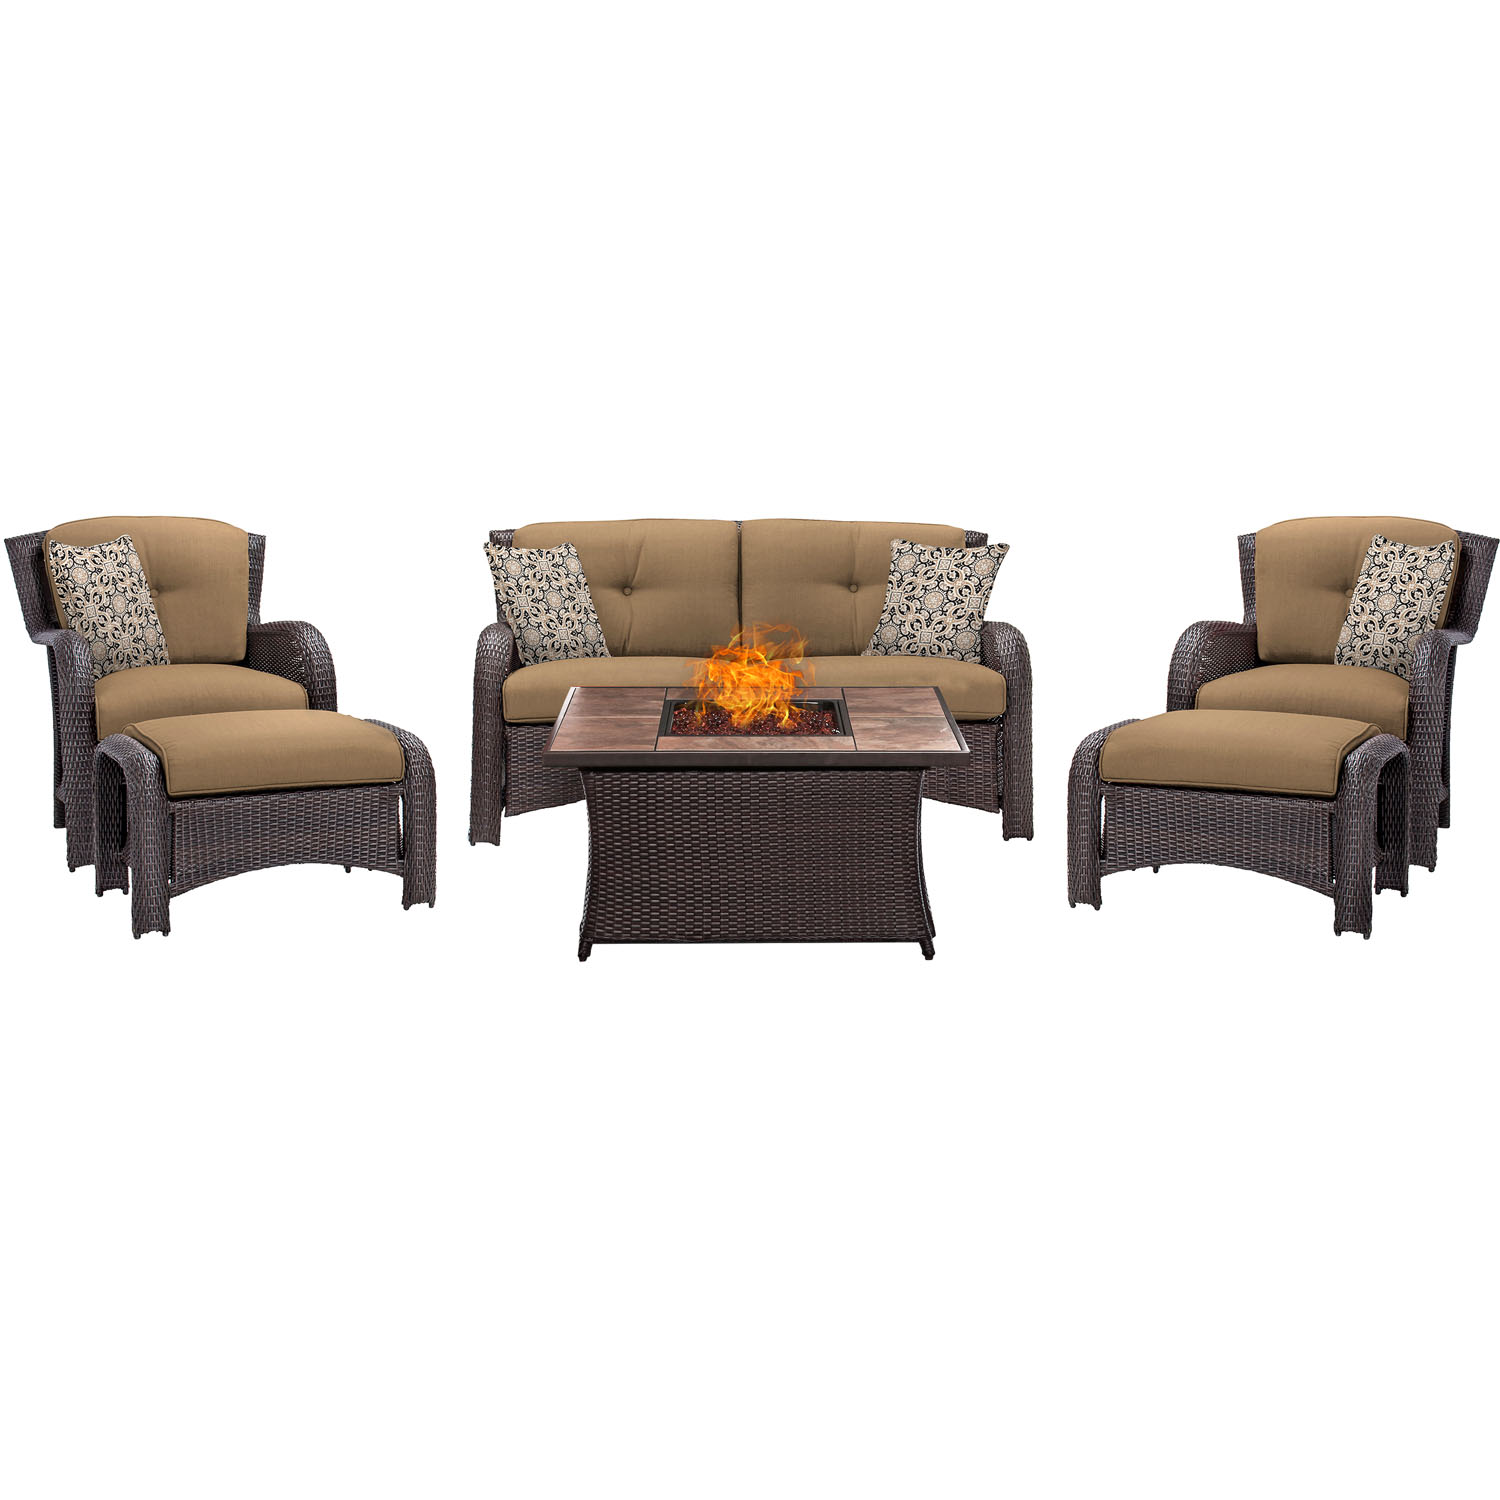 Hanover Strathmere 6-Piece Fire Pit Lounge Set with Faux-Stone Tile Top - image 5 of 9